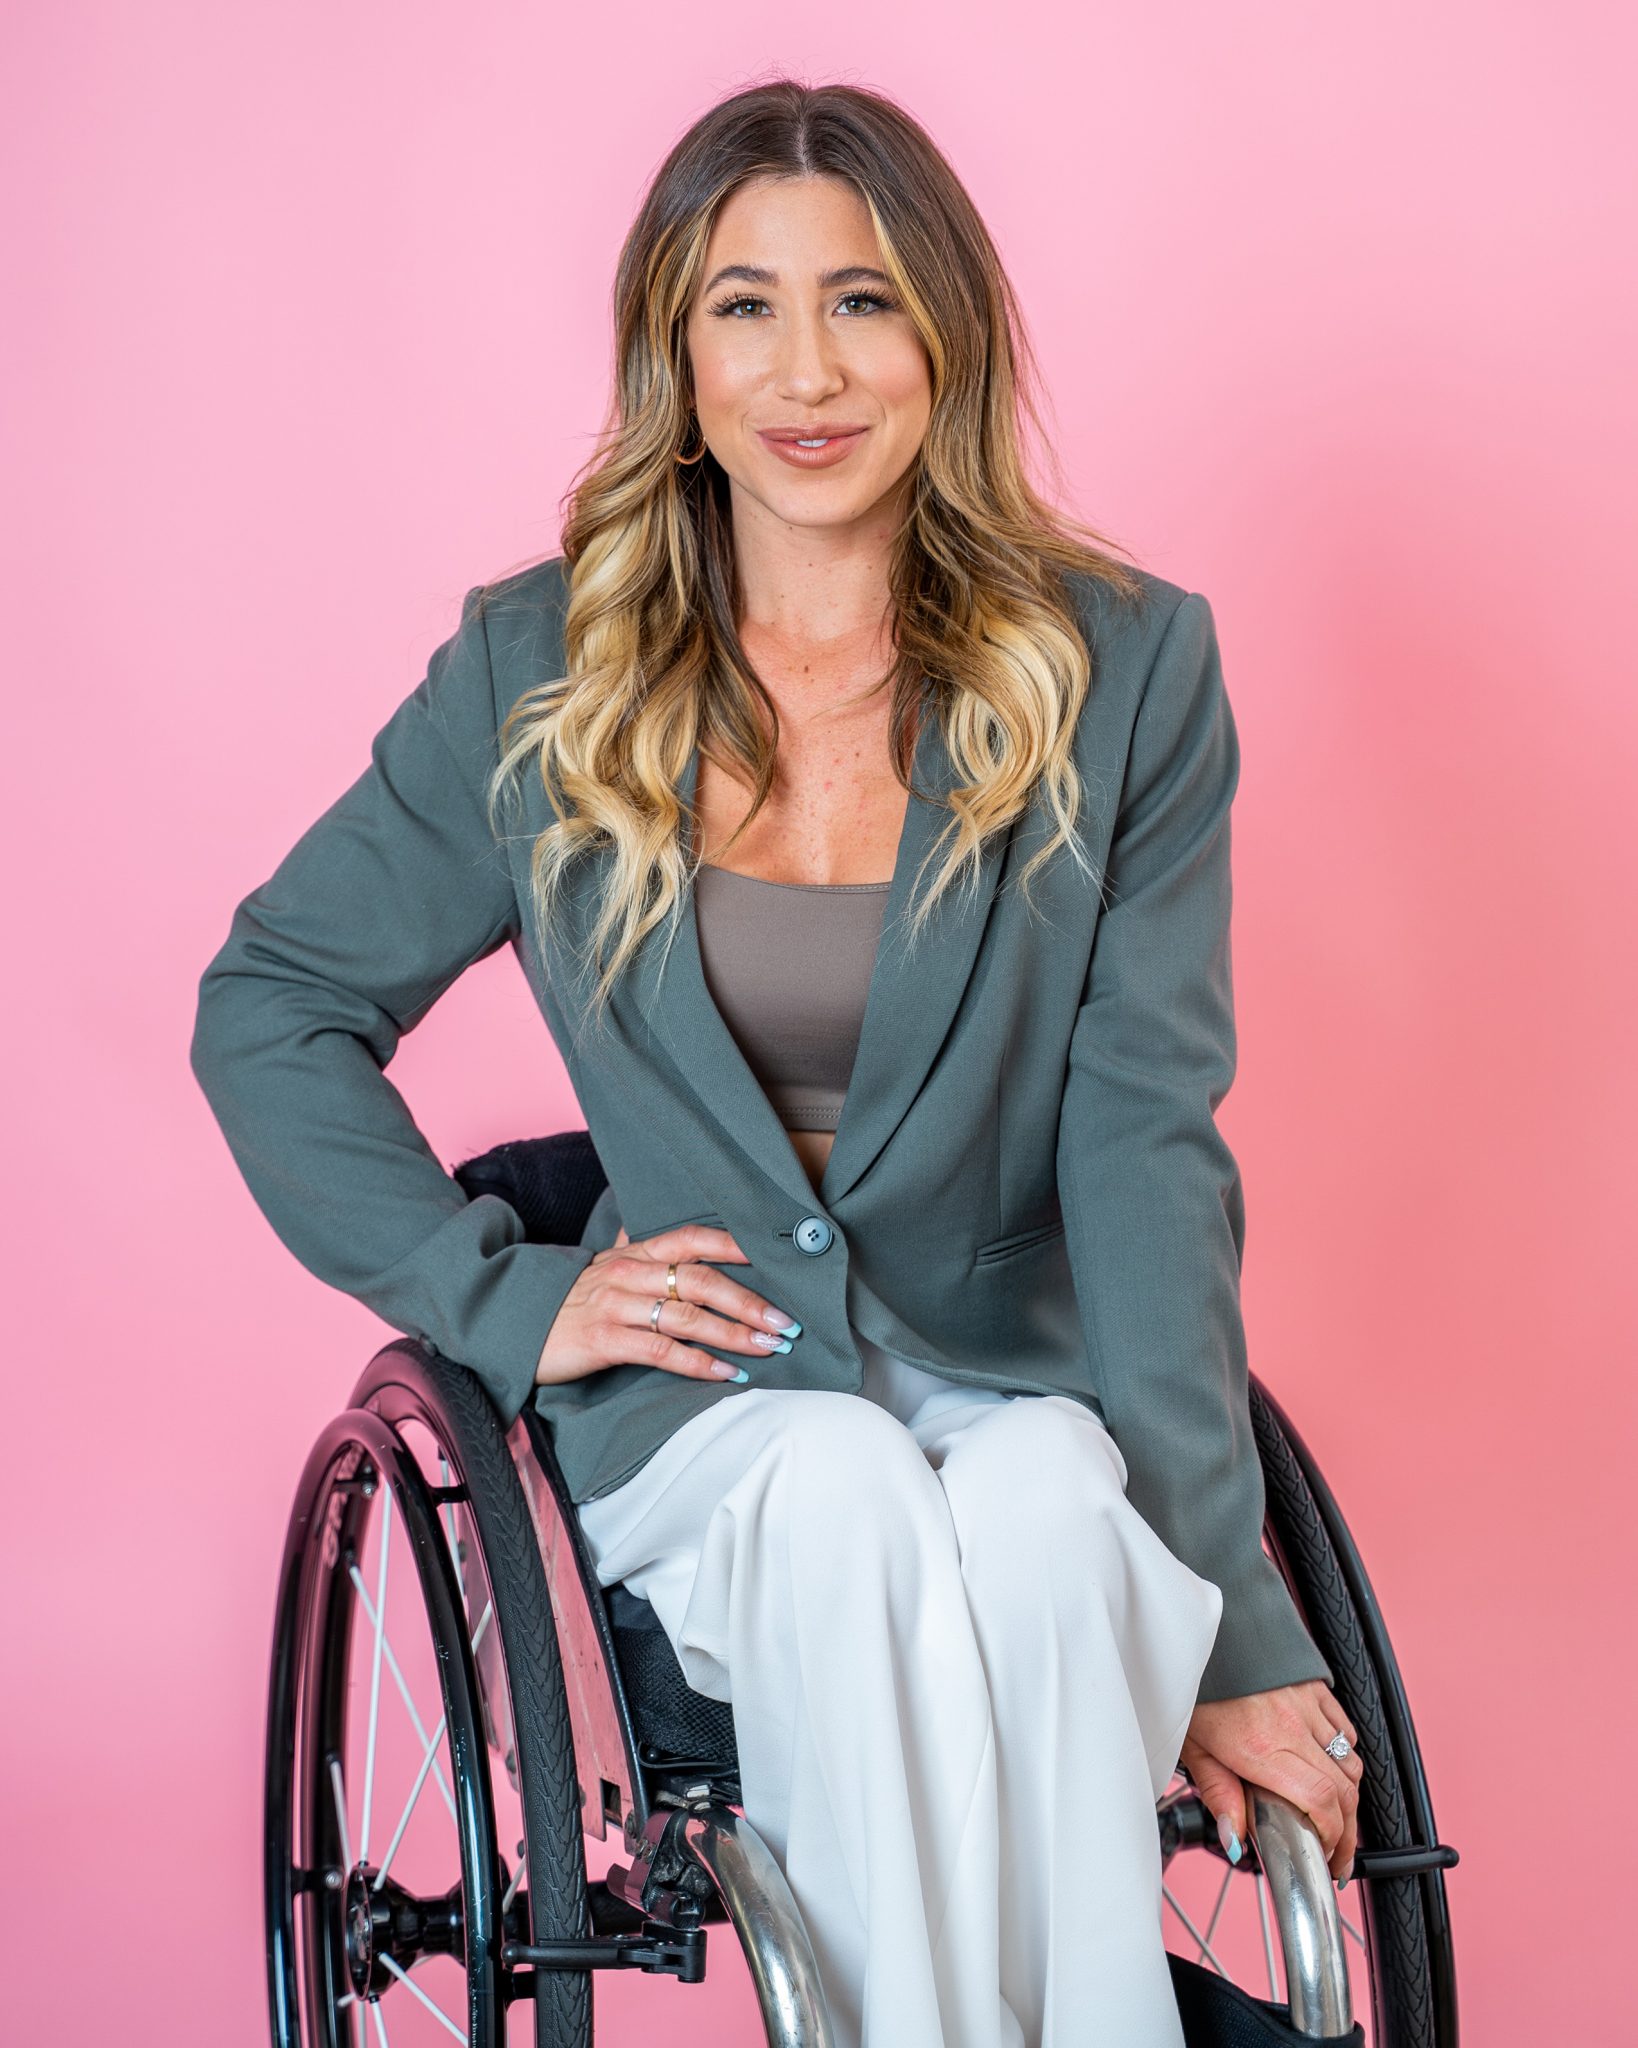 Photo of Chelsie Hill in front of a pink backdrop. She is a white woman using a manual wheelchair with long brown and blonde hair wearing a grey blazer and white pants.